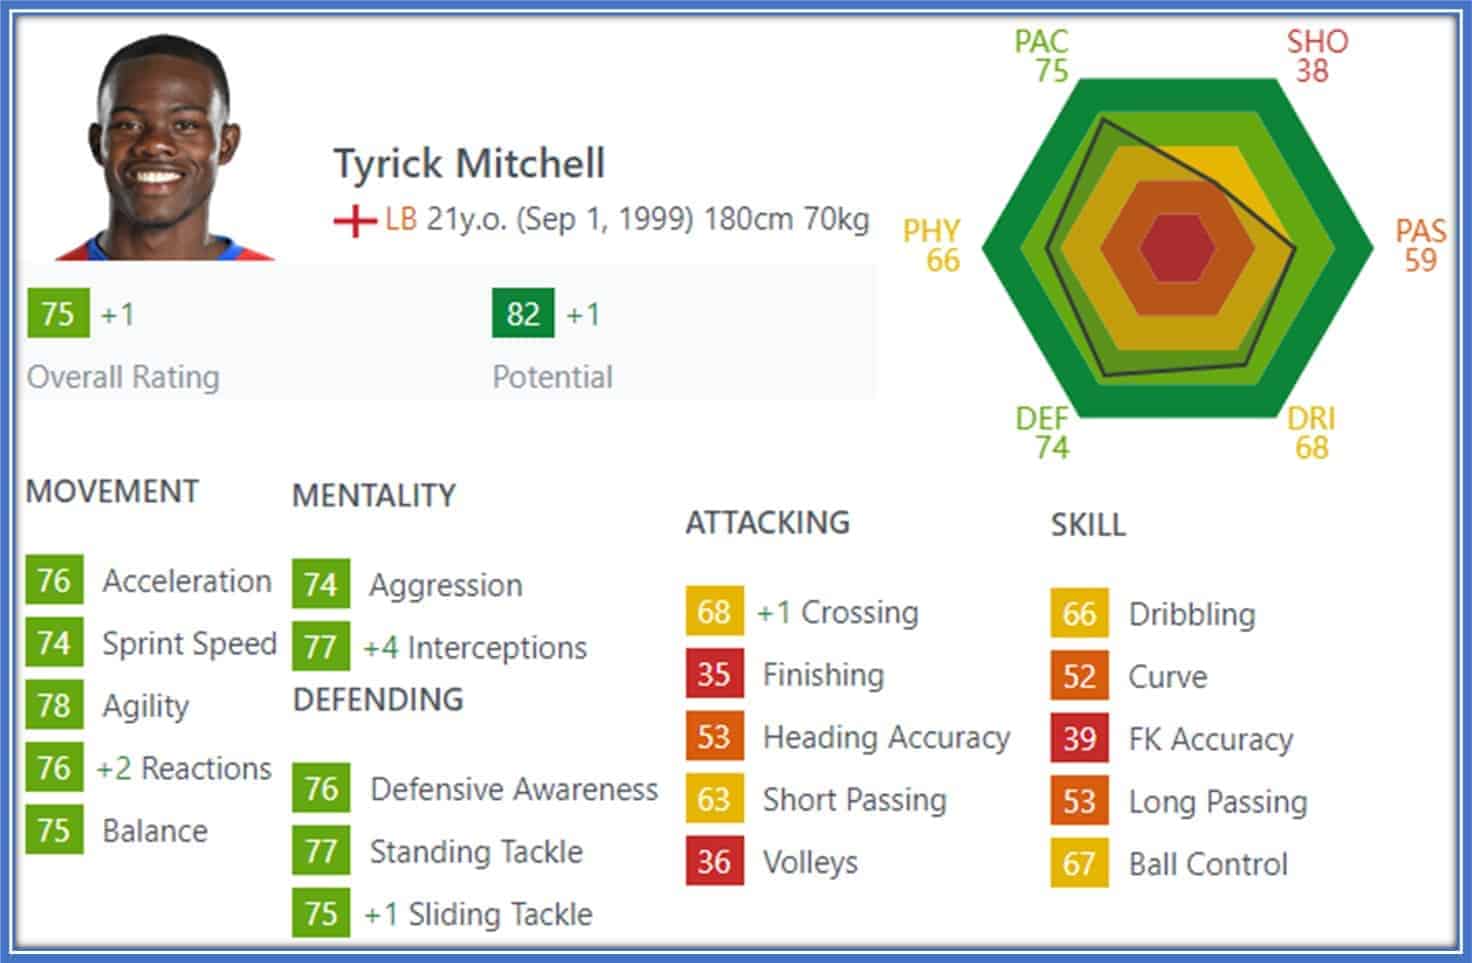 Movement and Mentality are Mitchell's greatest football assets.